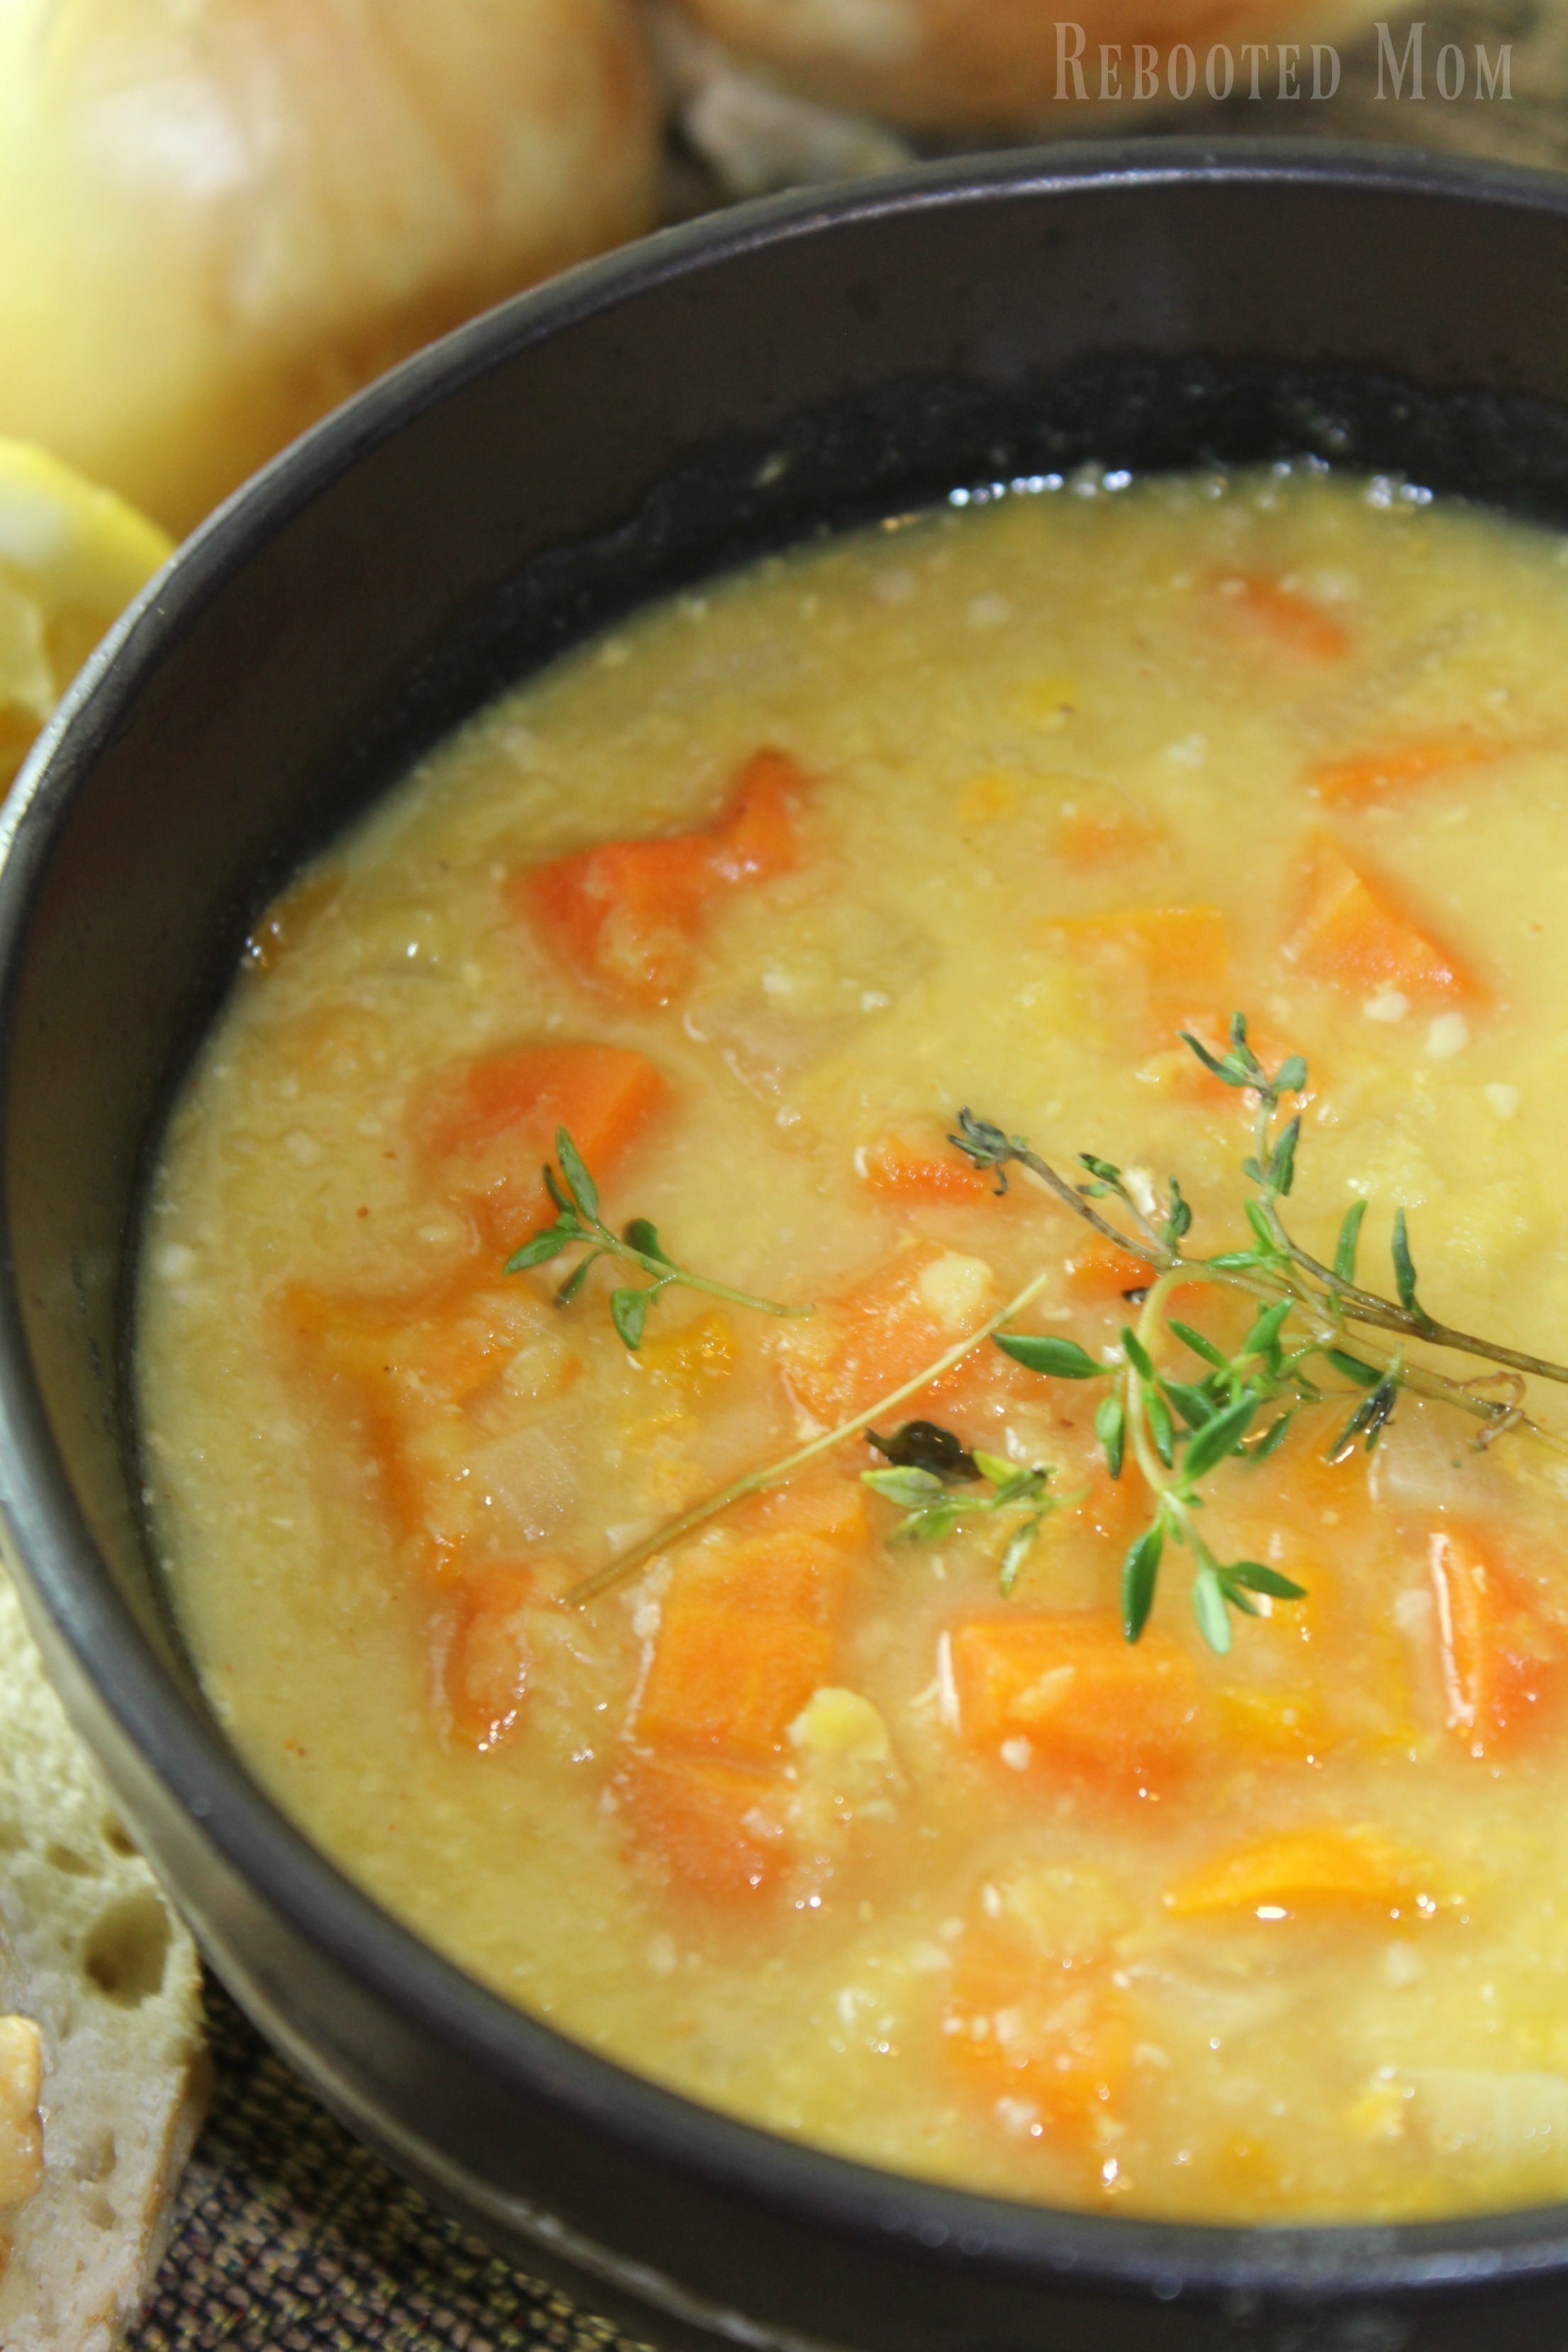 Fresh carrots, bell pepper, lemon and rosemary combined with red lentils create this easy and savory soup.